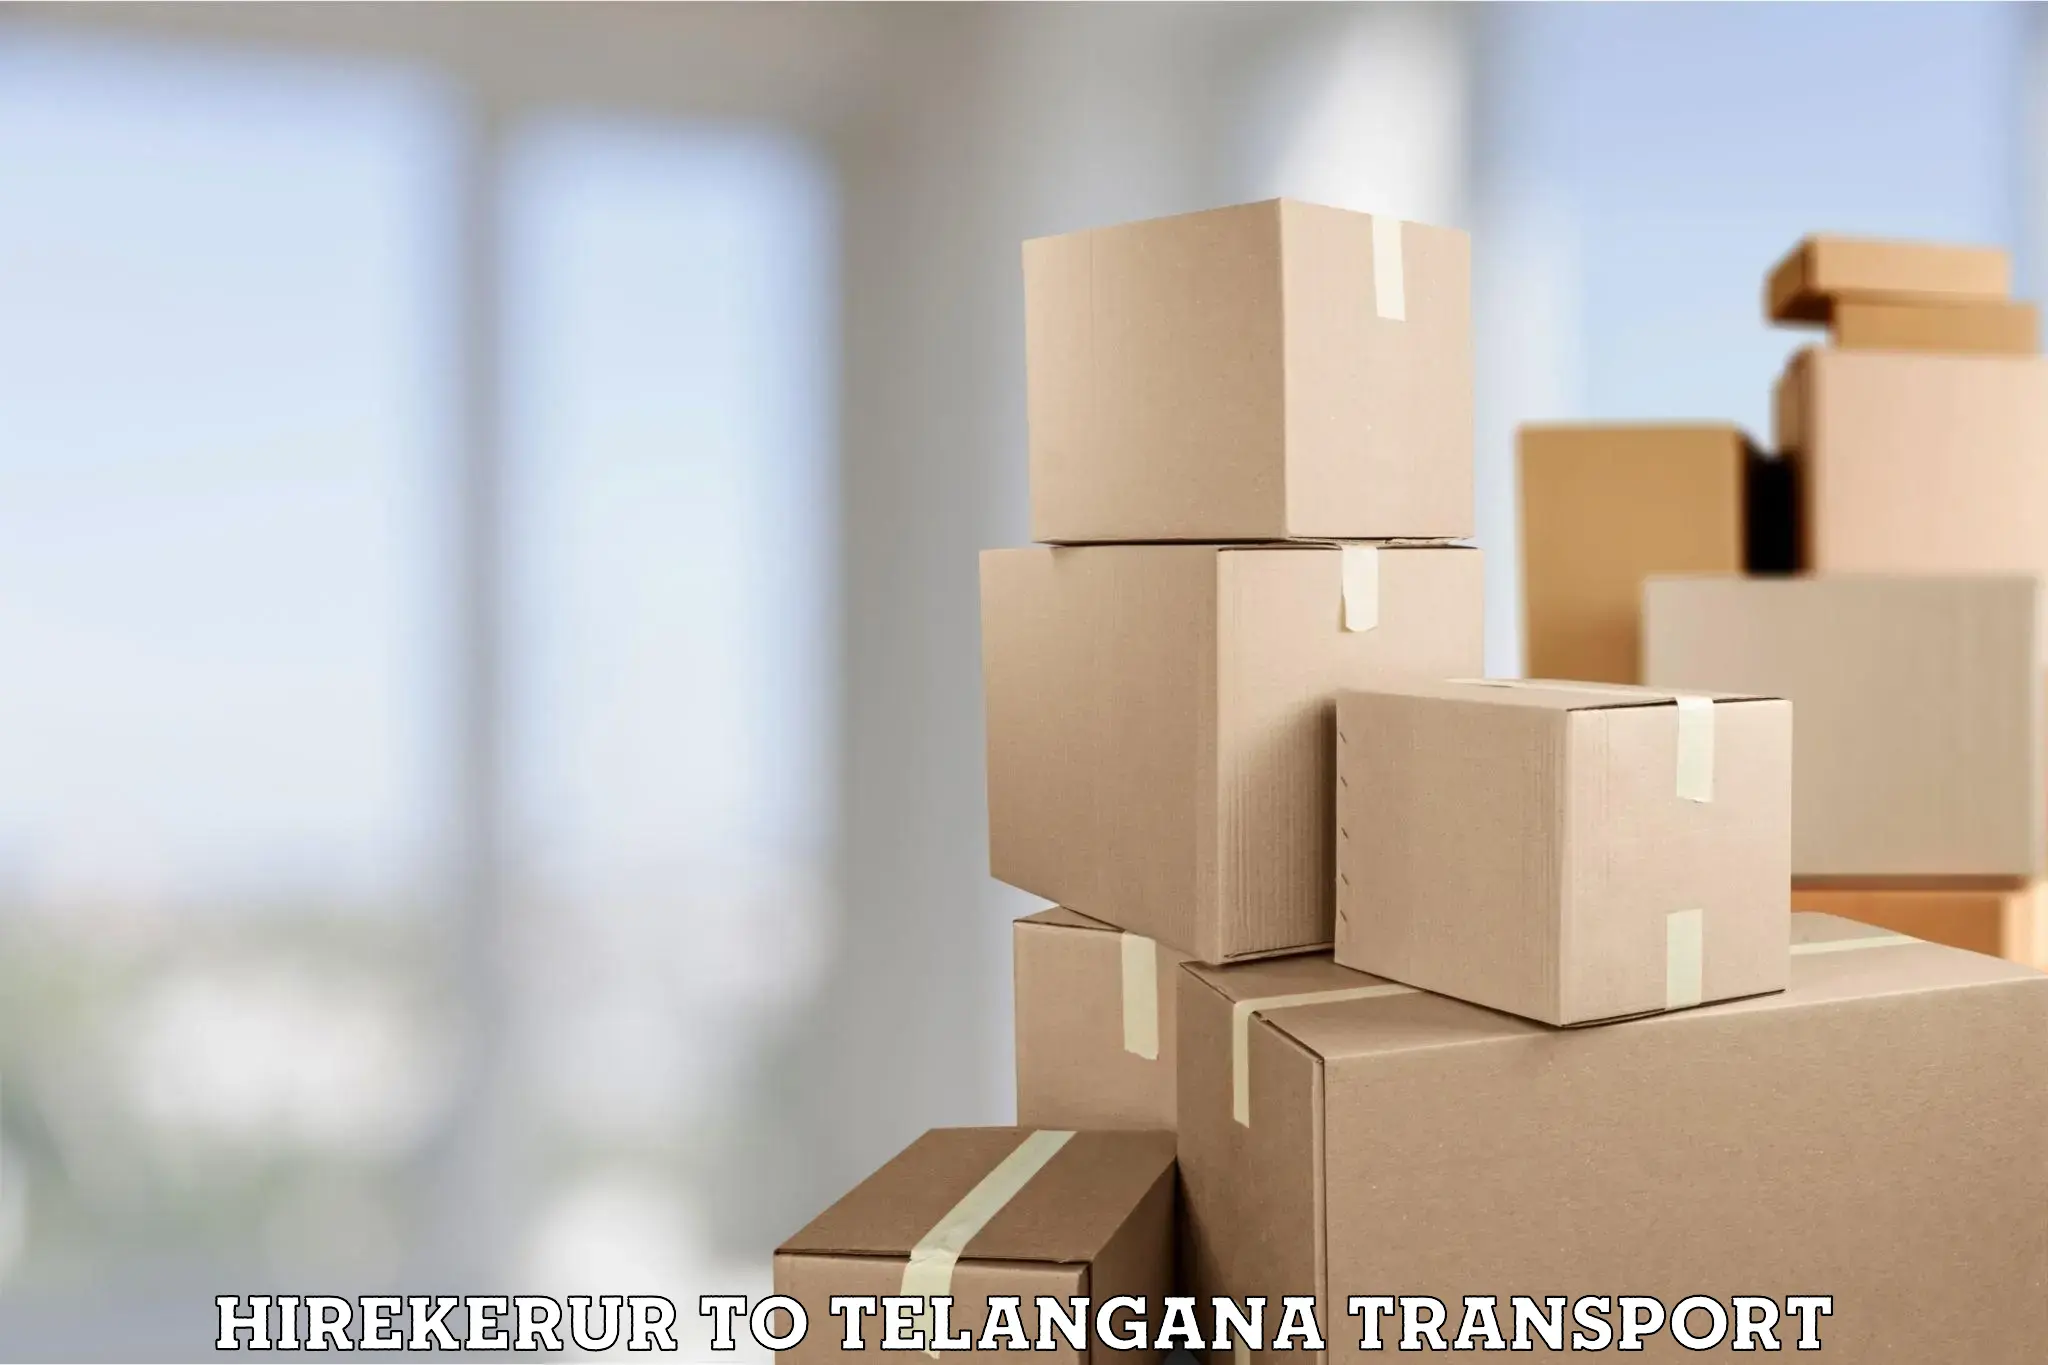 Truck transport companies in India Hirekerur to Sathupally